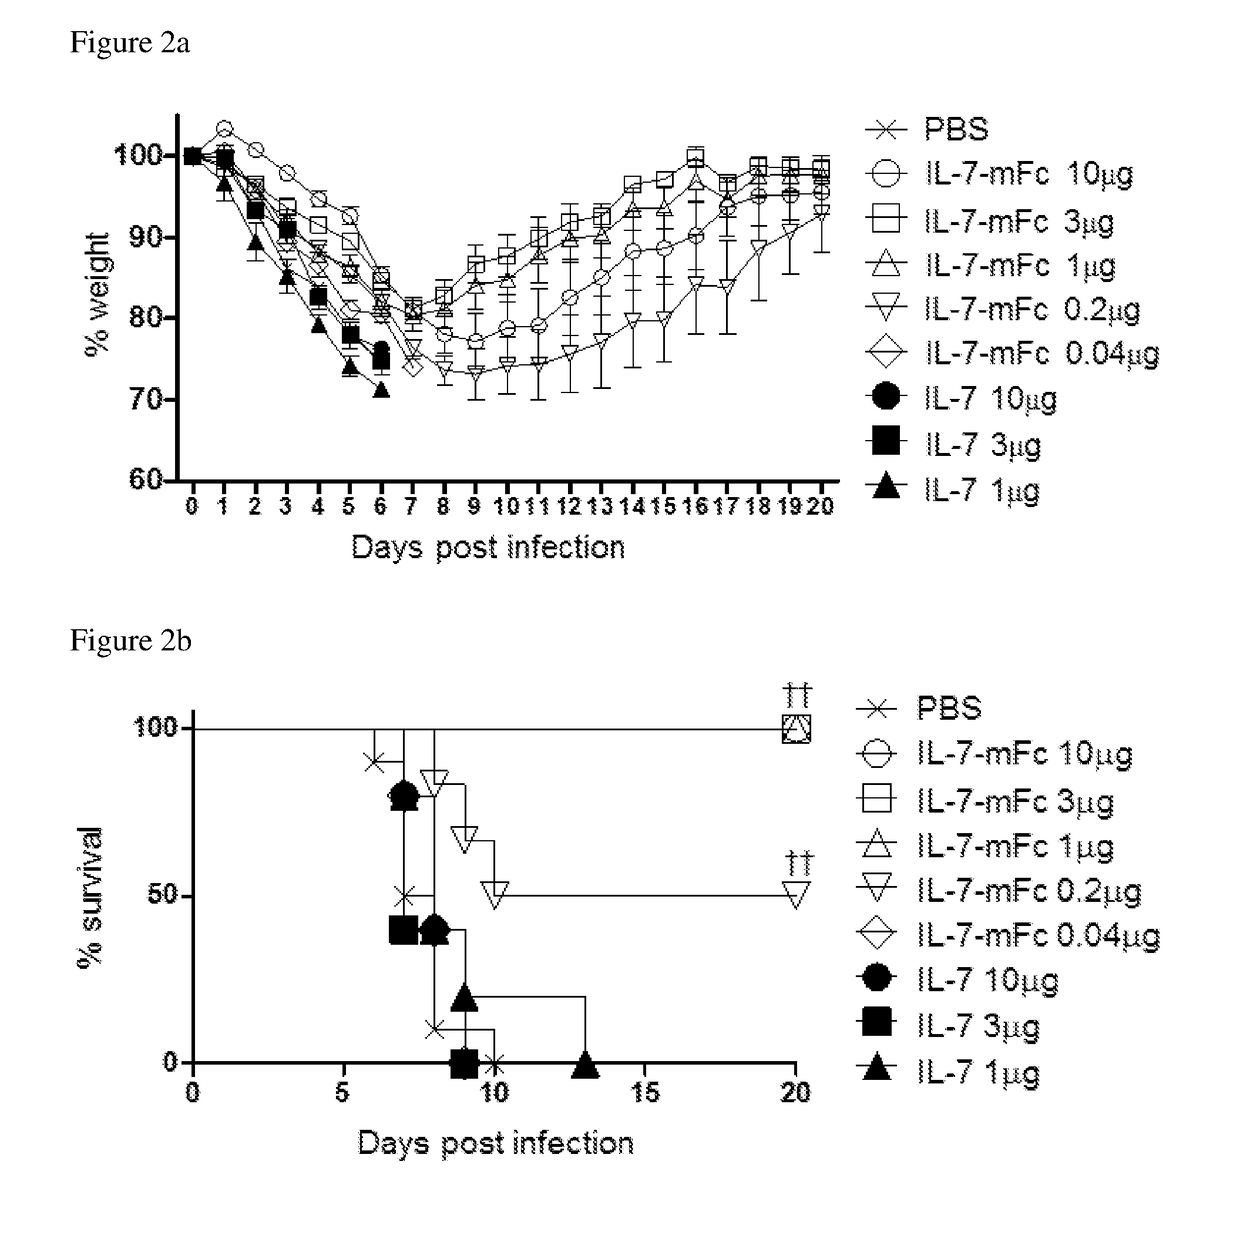 Pharmaceutical composition comprising immunoglobulin fc-fused interleukin-7 fusion protein for preventing or treating infection from influenza virus